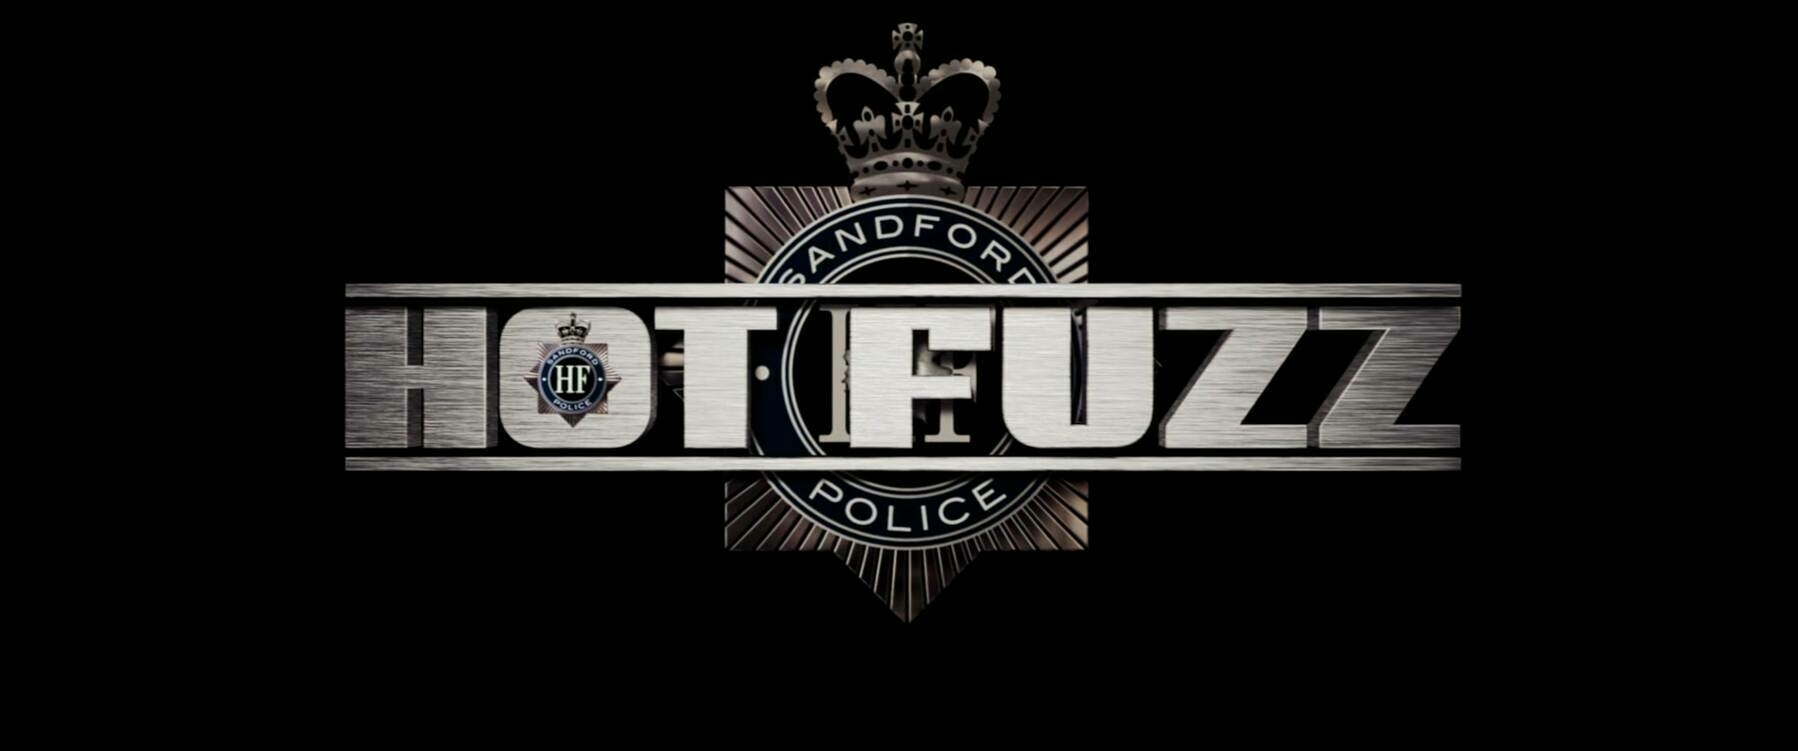 The title card for the film, Hot Fuzz.